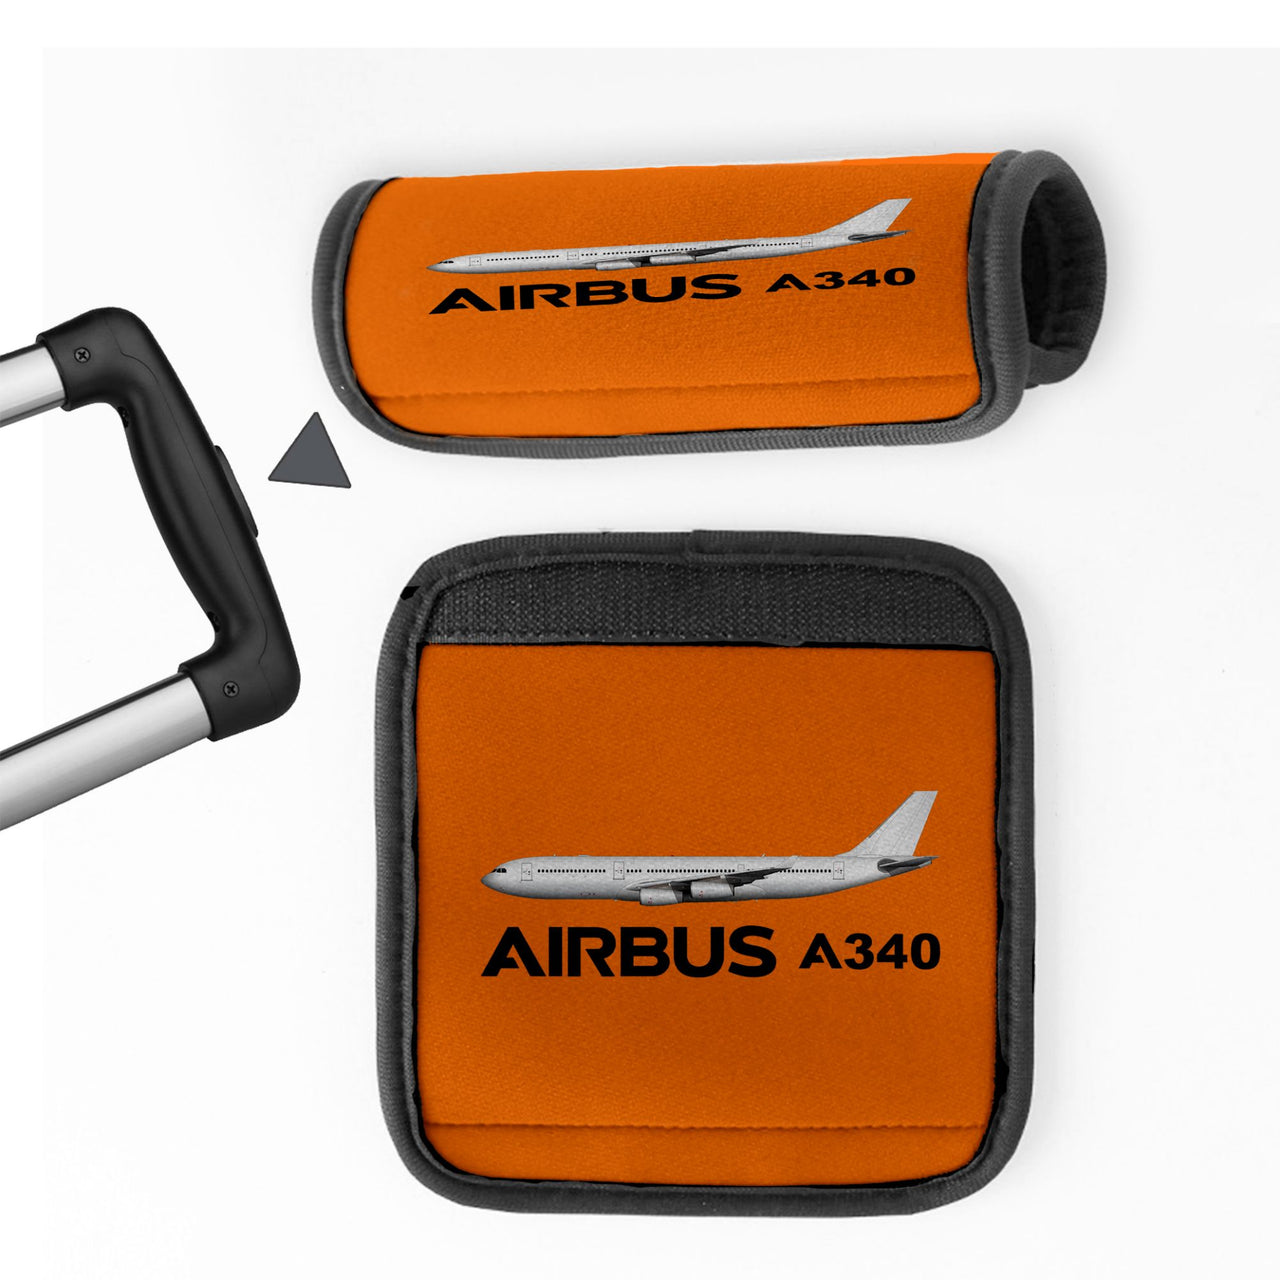 The Airbus A340 Designed Neoprene Luggage Handle Covers